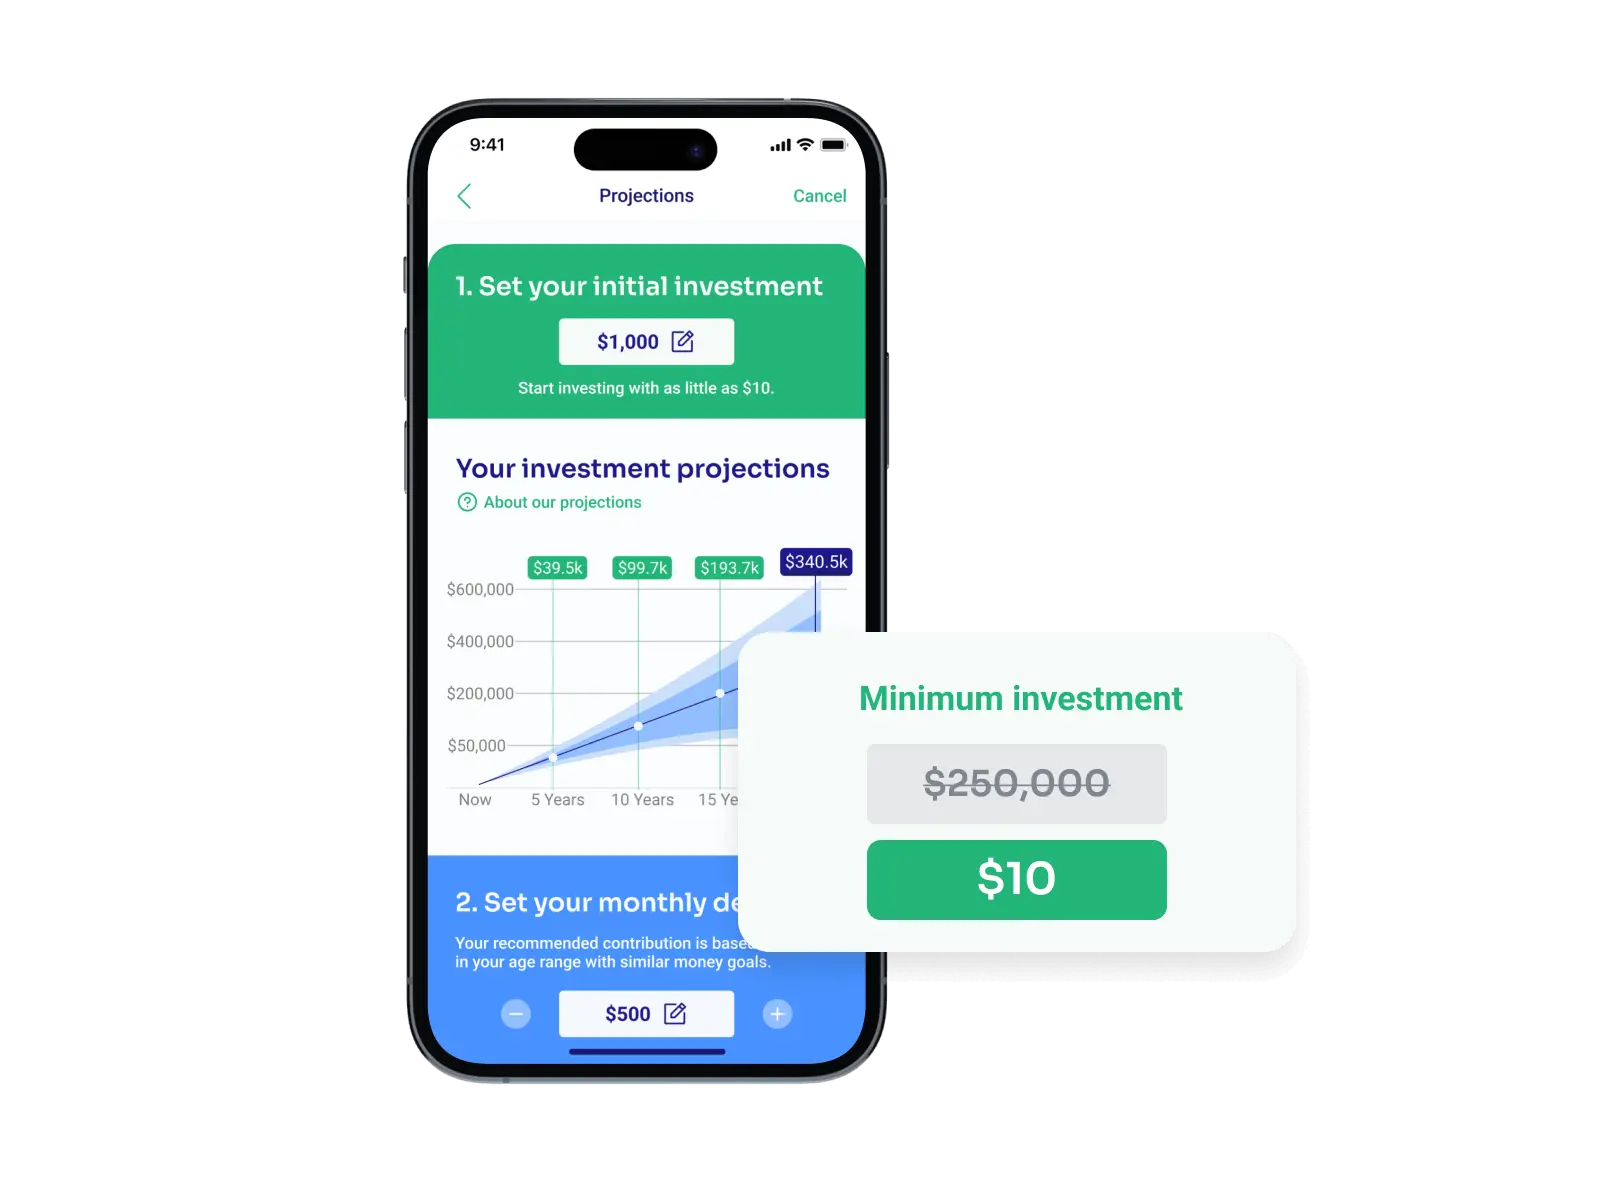 iPhone mockup illustrating the FLIT Invest app screen where you can set initial and monthly deposits. In the middle of the screen there is a chart that shows how your contributions are expected to grow over time by investing with FLIT Invest.